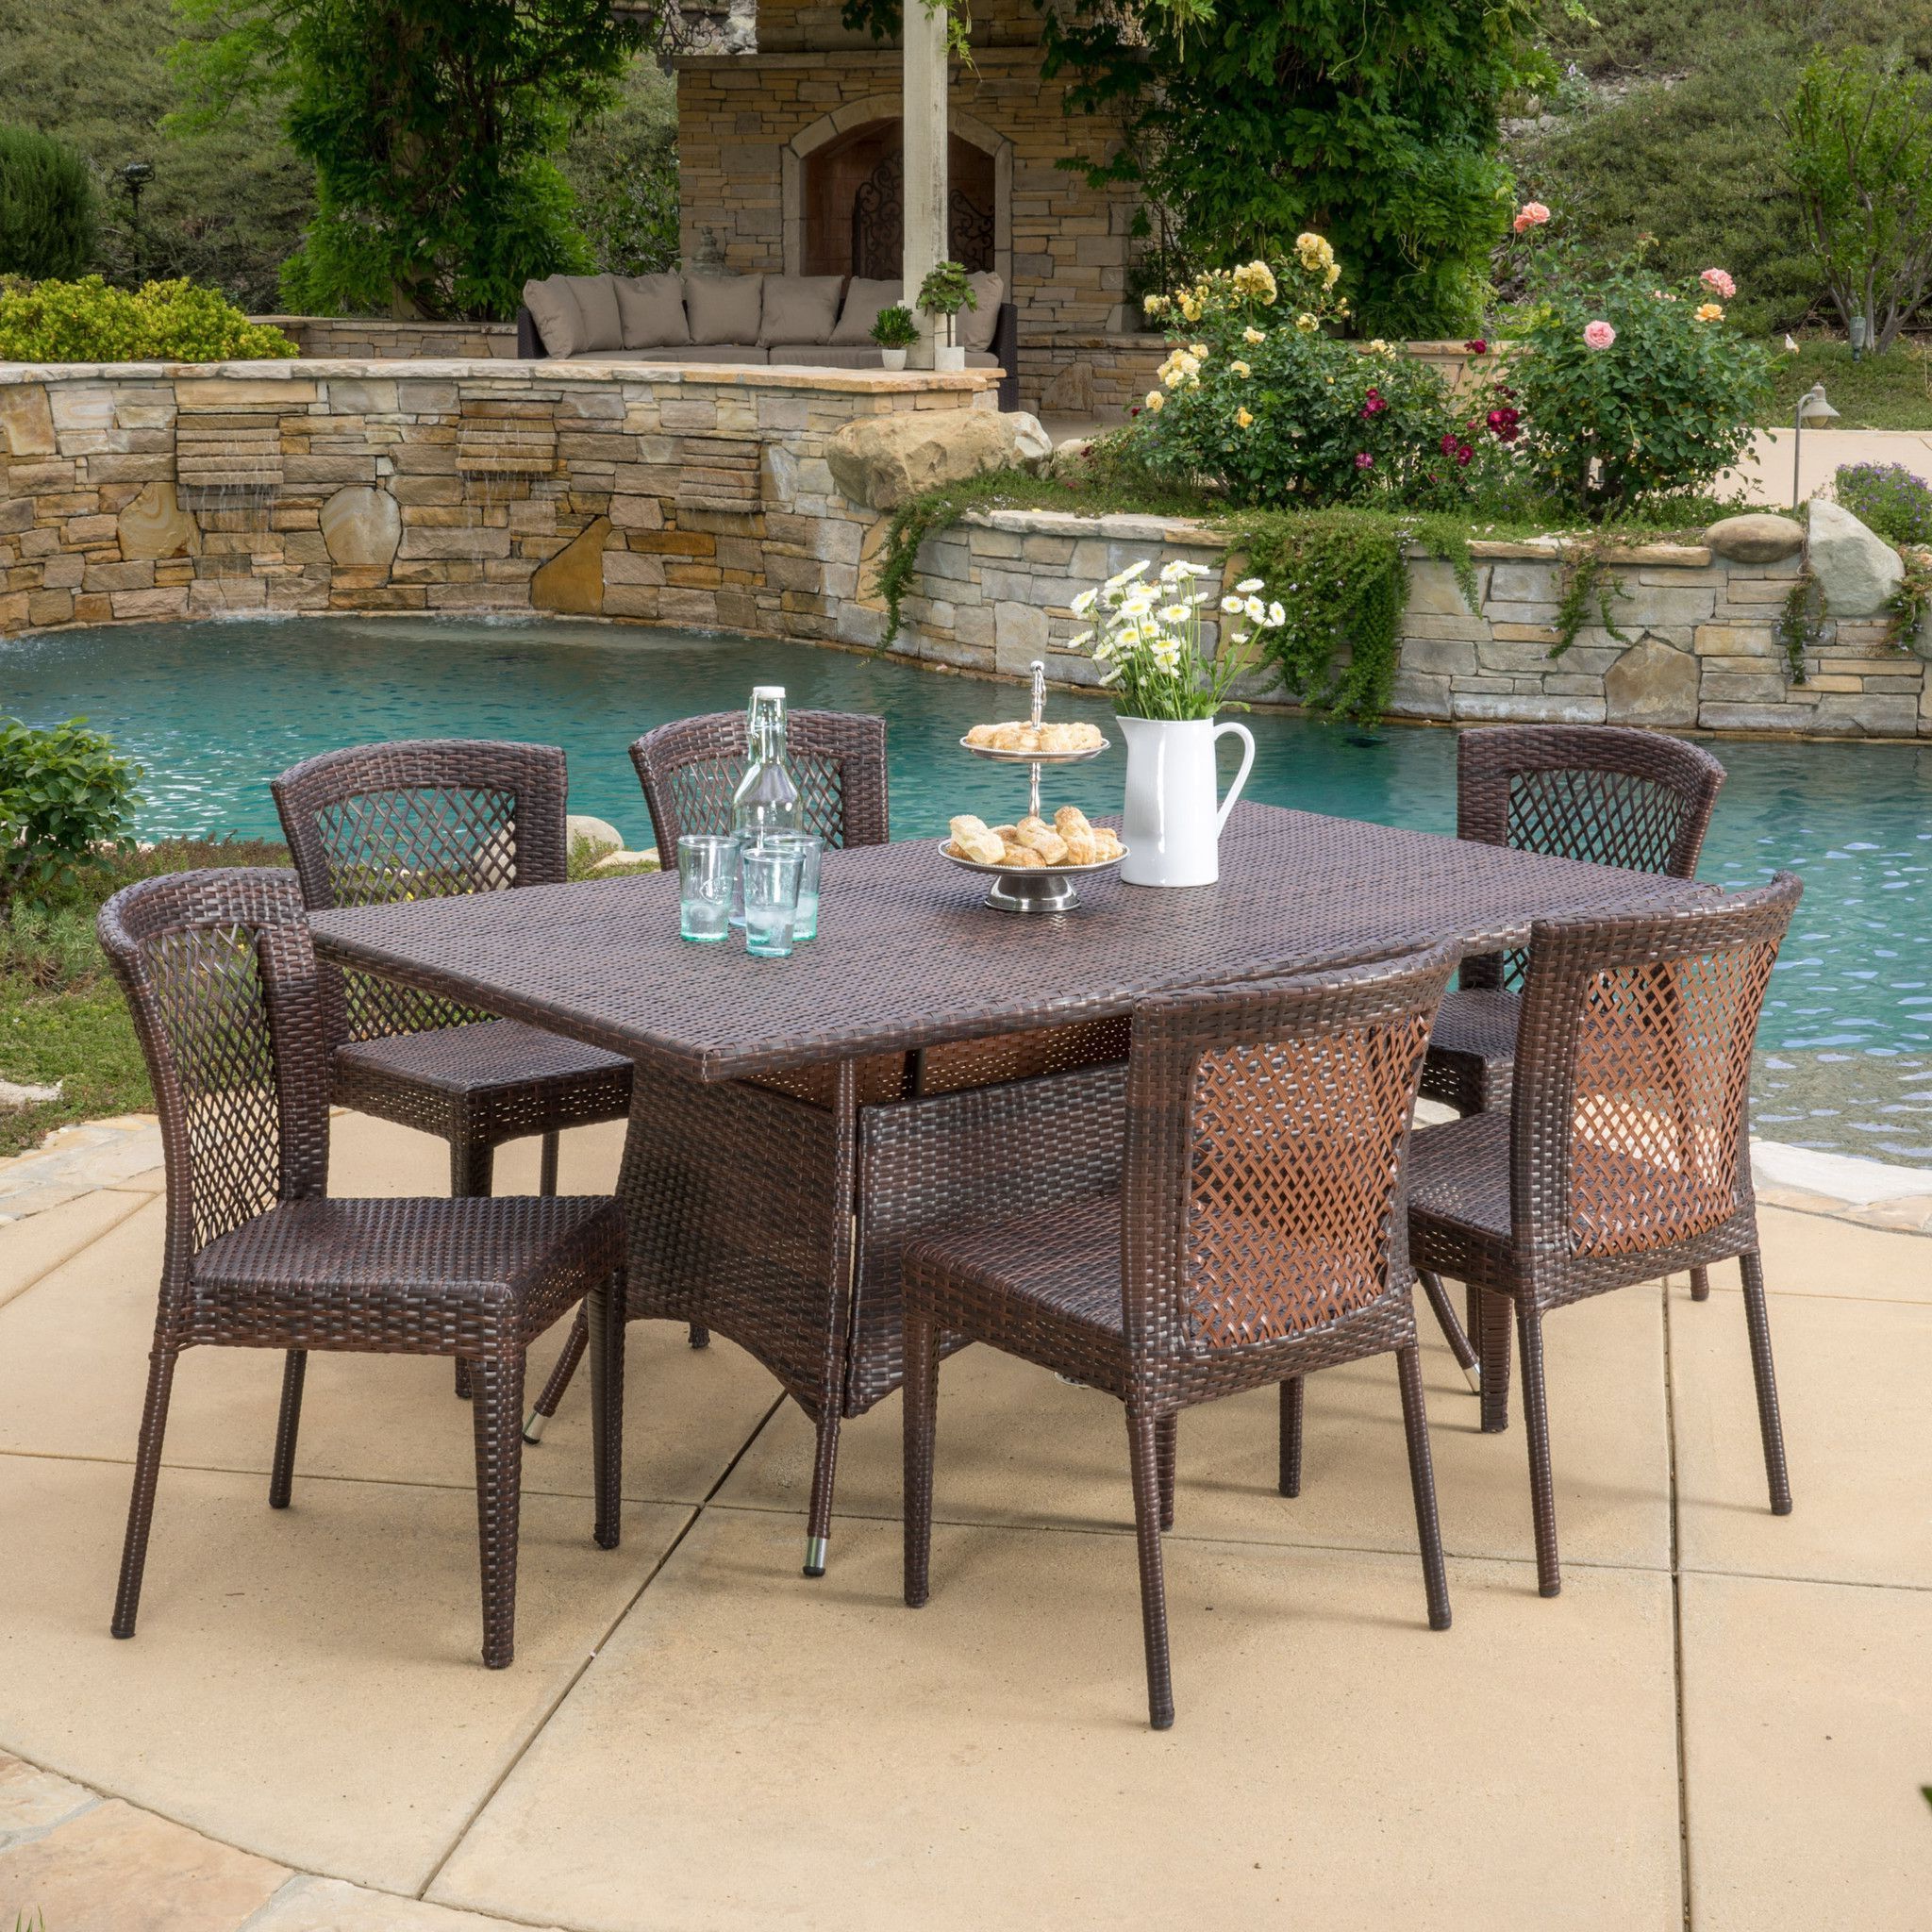 Trendy Perry Outdoor 7 Piece Multi Brown Wicker Dining Set With Umbrella Hole Throughout Brown Wicker Rectangular Patio Dining Sets (View 4 of 15)